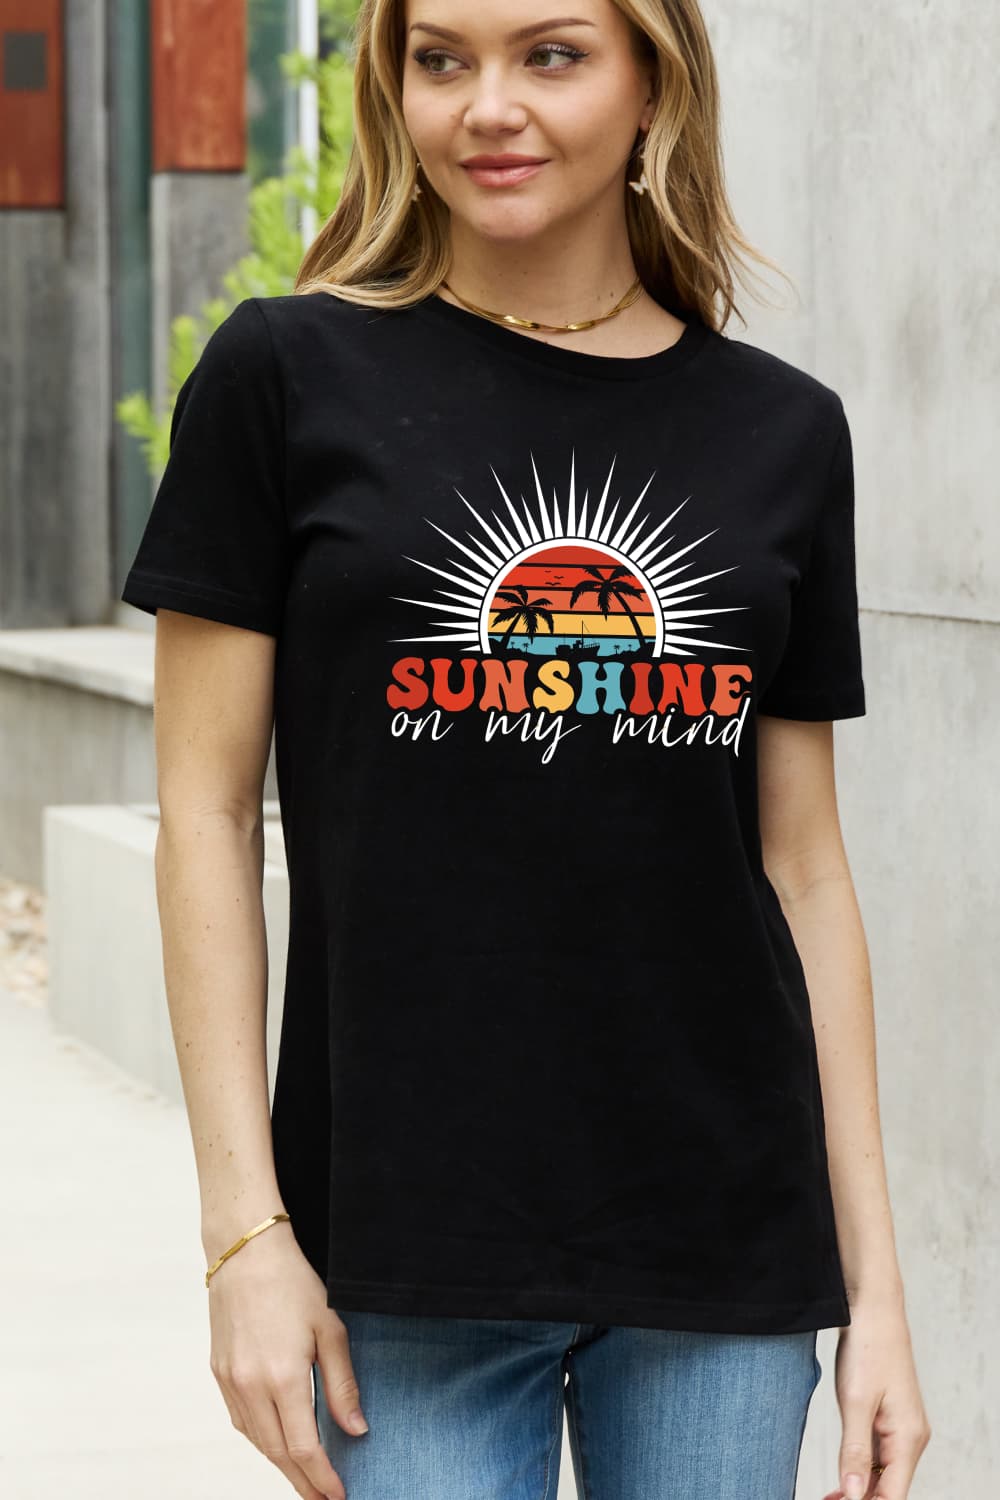 Simply Love Full Size SUNSHINE ON MY MIND Graphic Cotton Tee